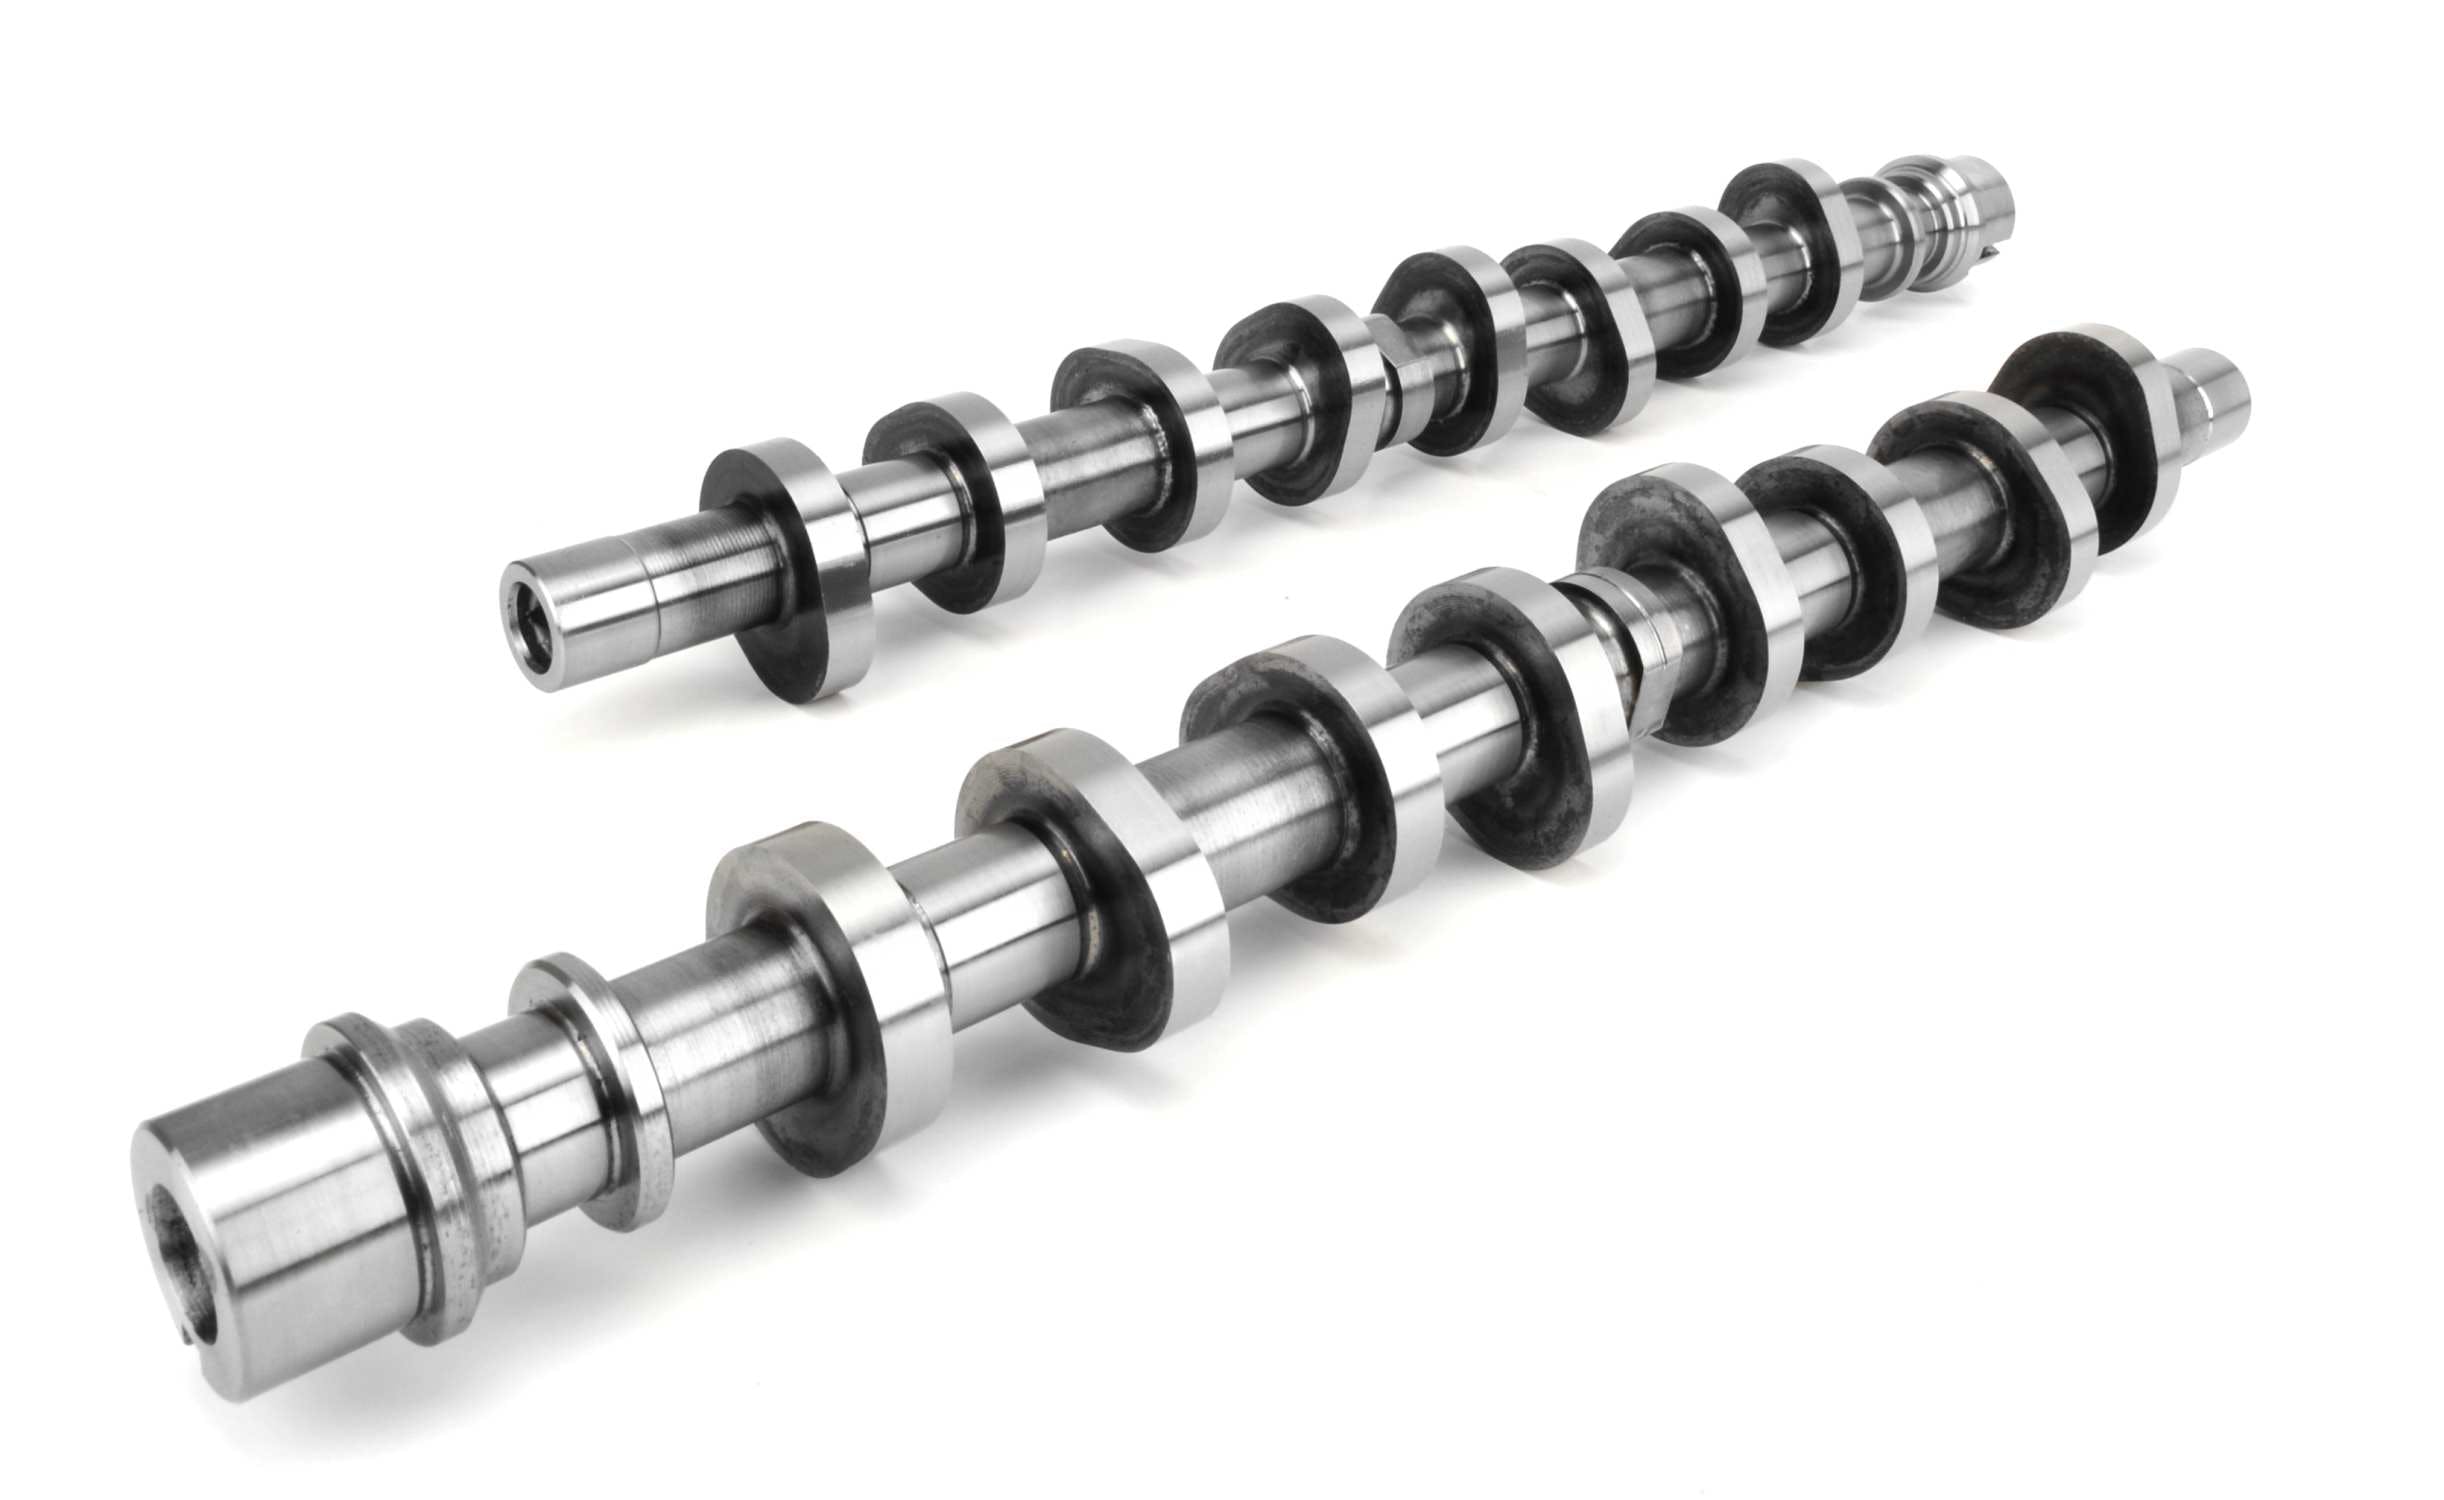 Competition Cams 102560 Xtreme Energy Camshaft